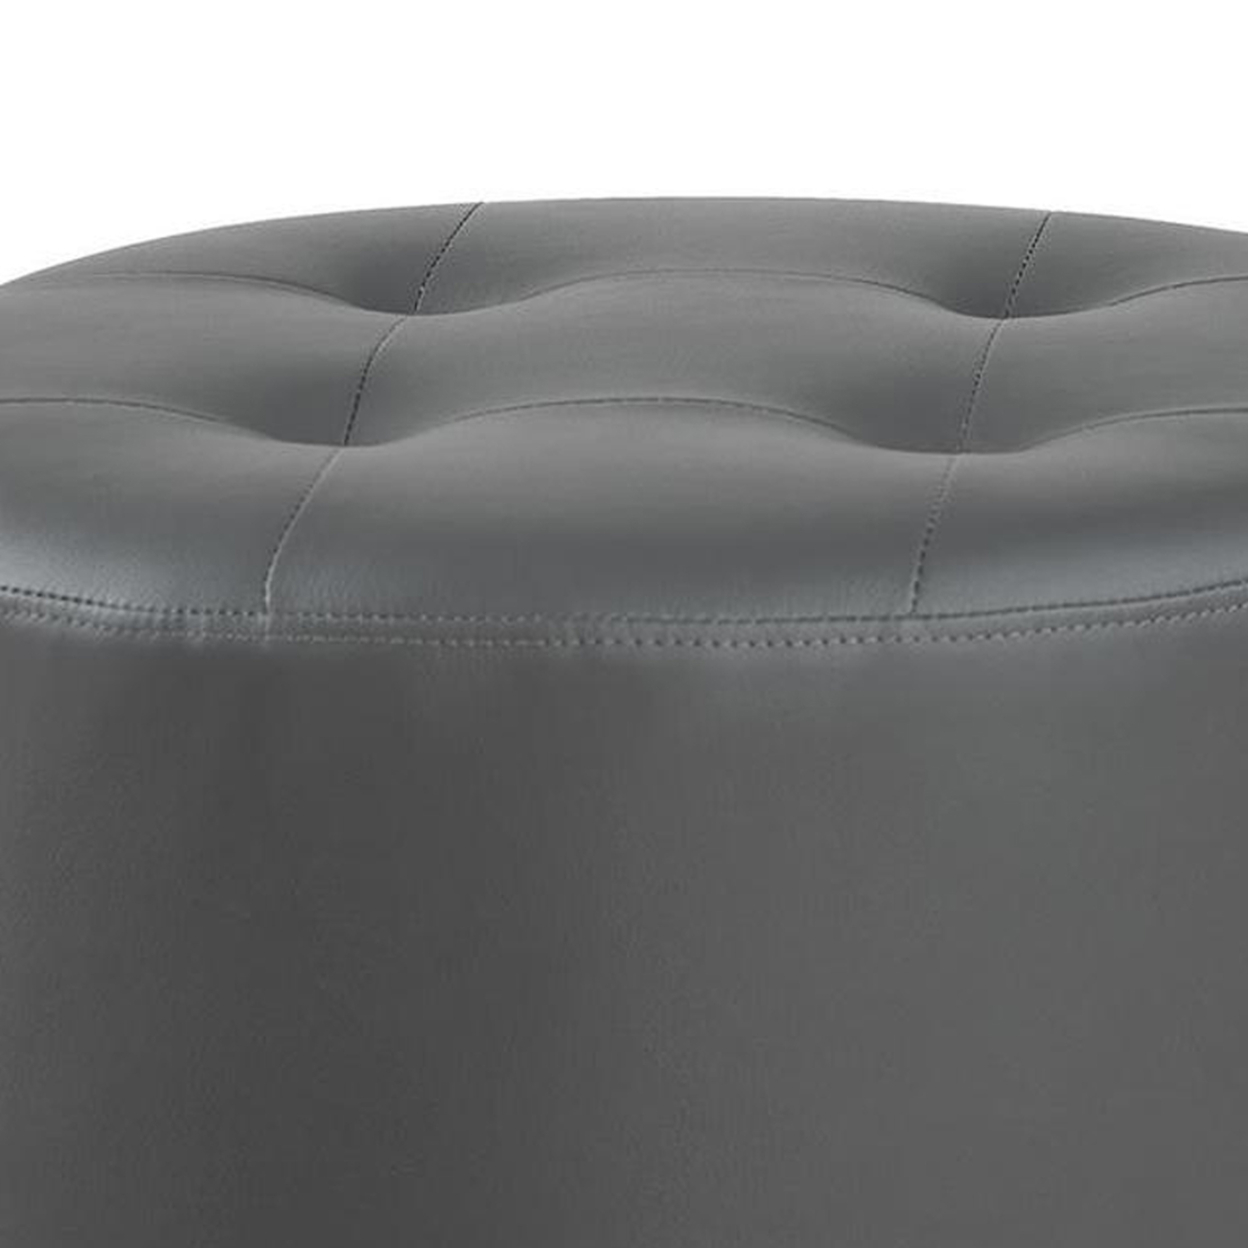 Round Leatherette Swivel Ottoman With Tufted Seat, Gray And Black- Saltoro Sherpi